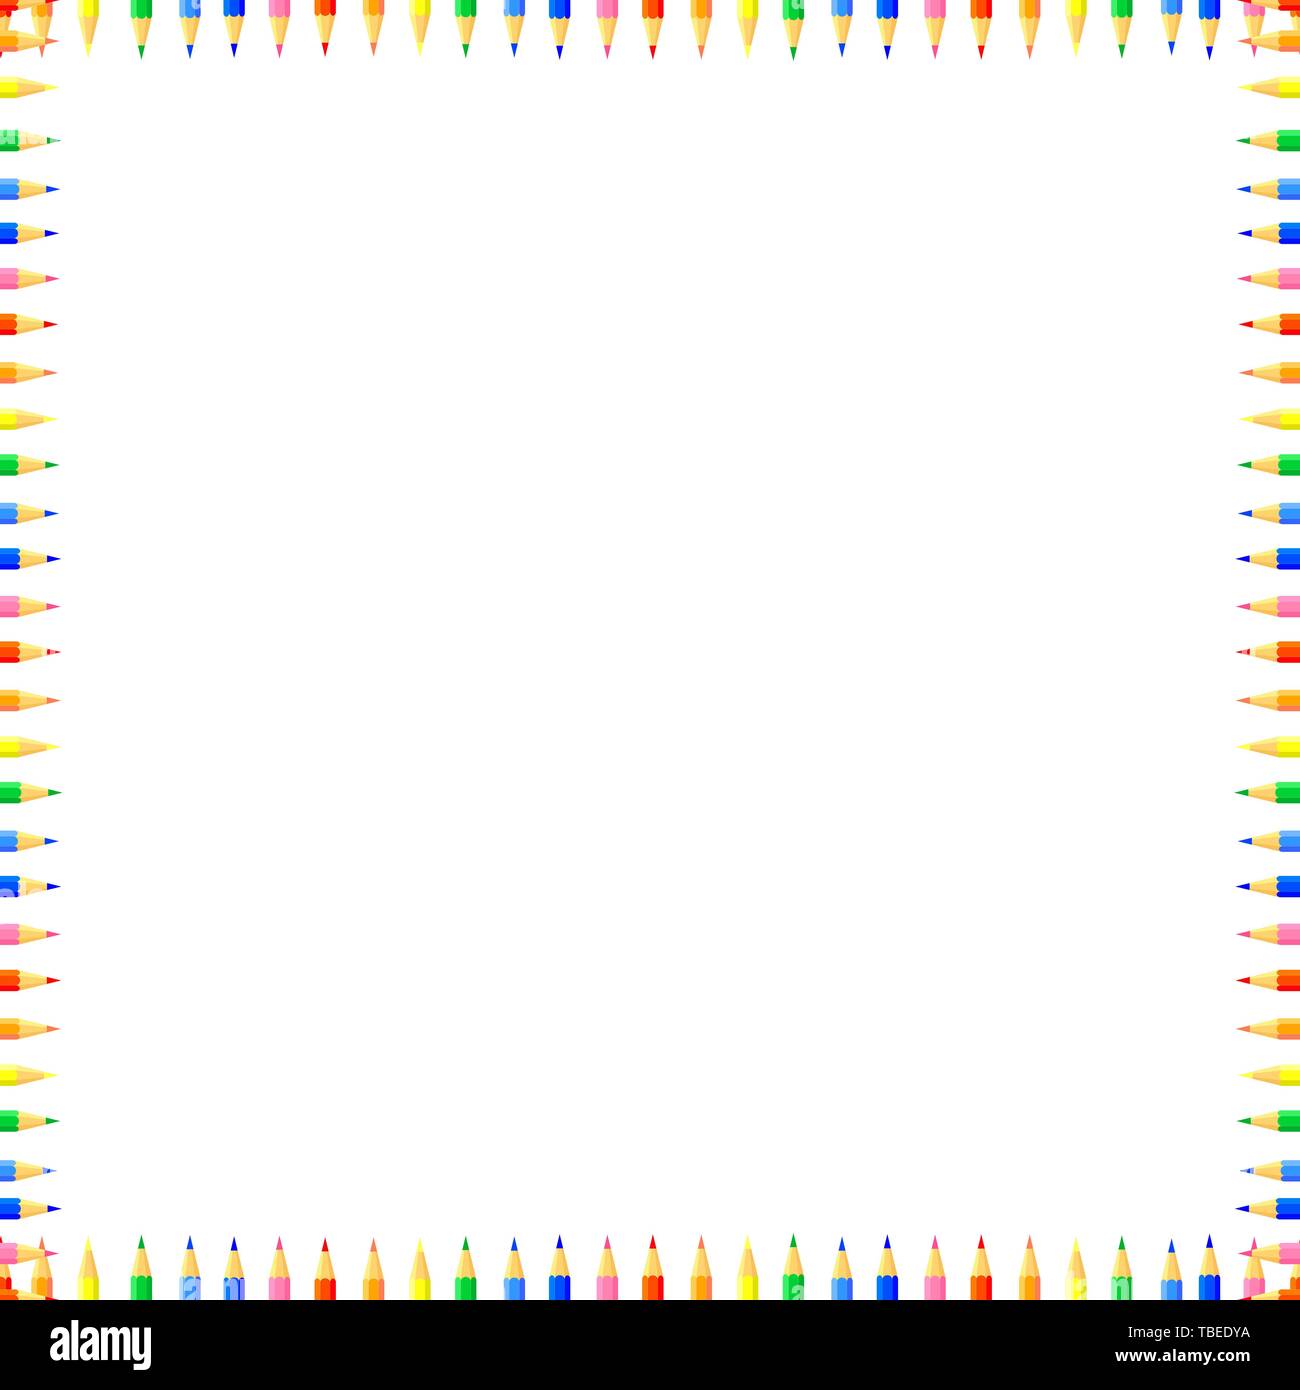 Vector colored seamless pattern. Rows of colored pencils sharpened on both sides, forming a frame. Good background site for artists,fabrics, children. Stock Vector